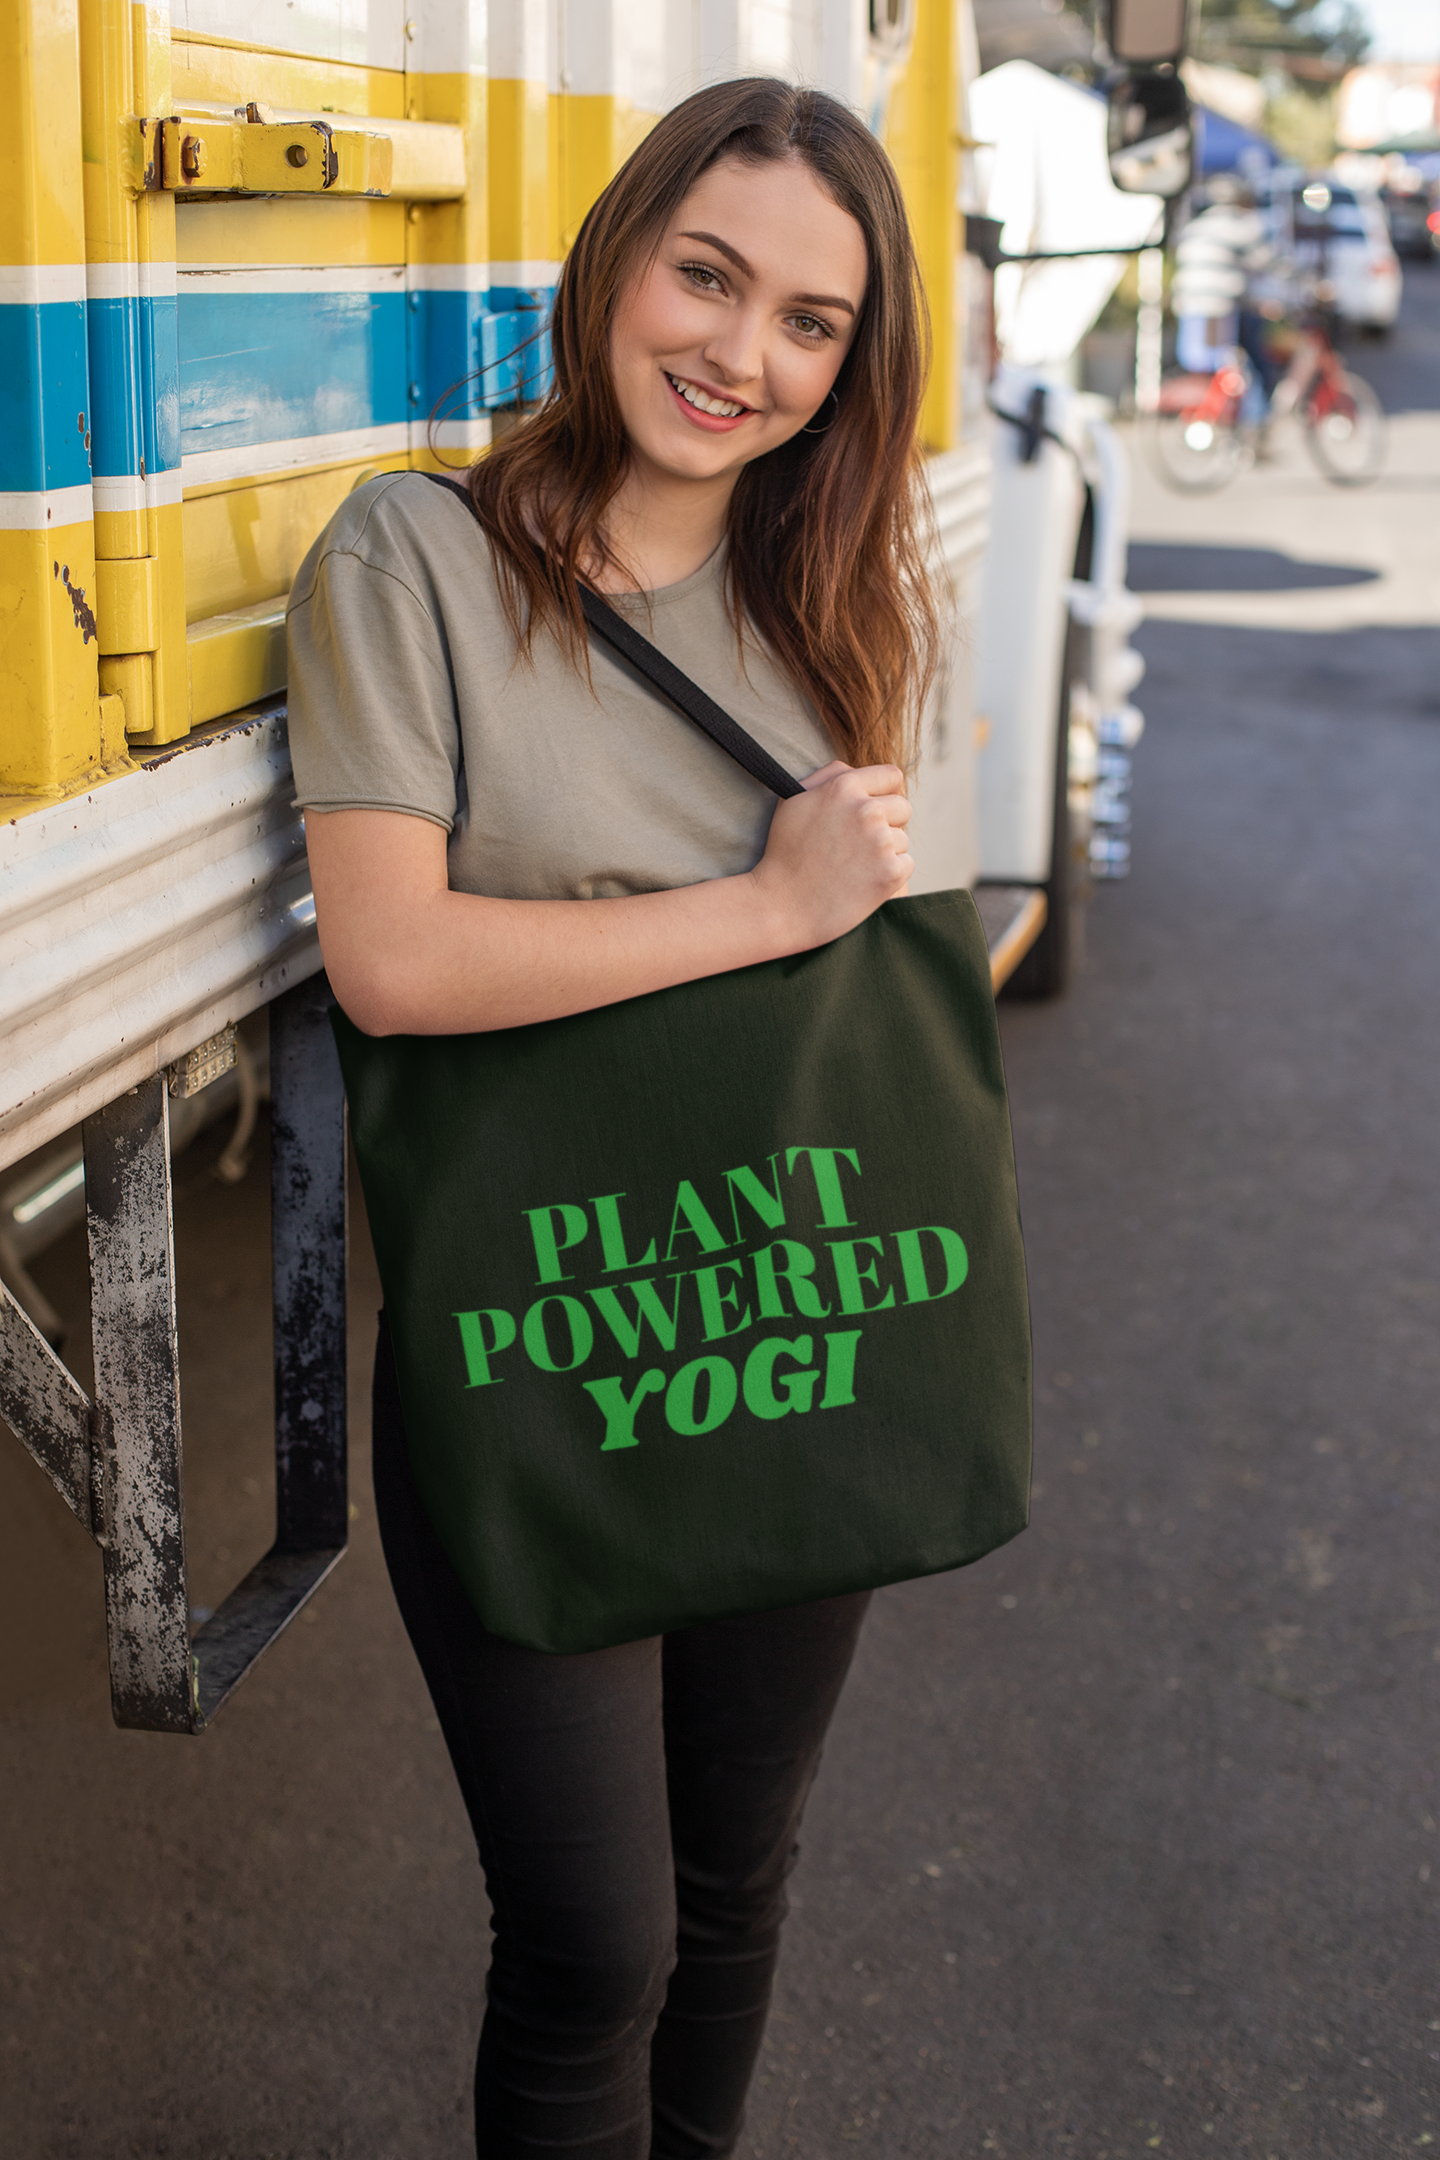 The Plant Powered Tote Bag